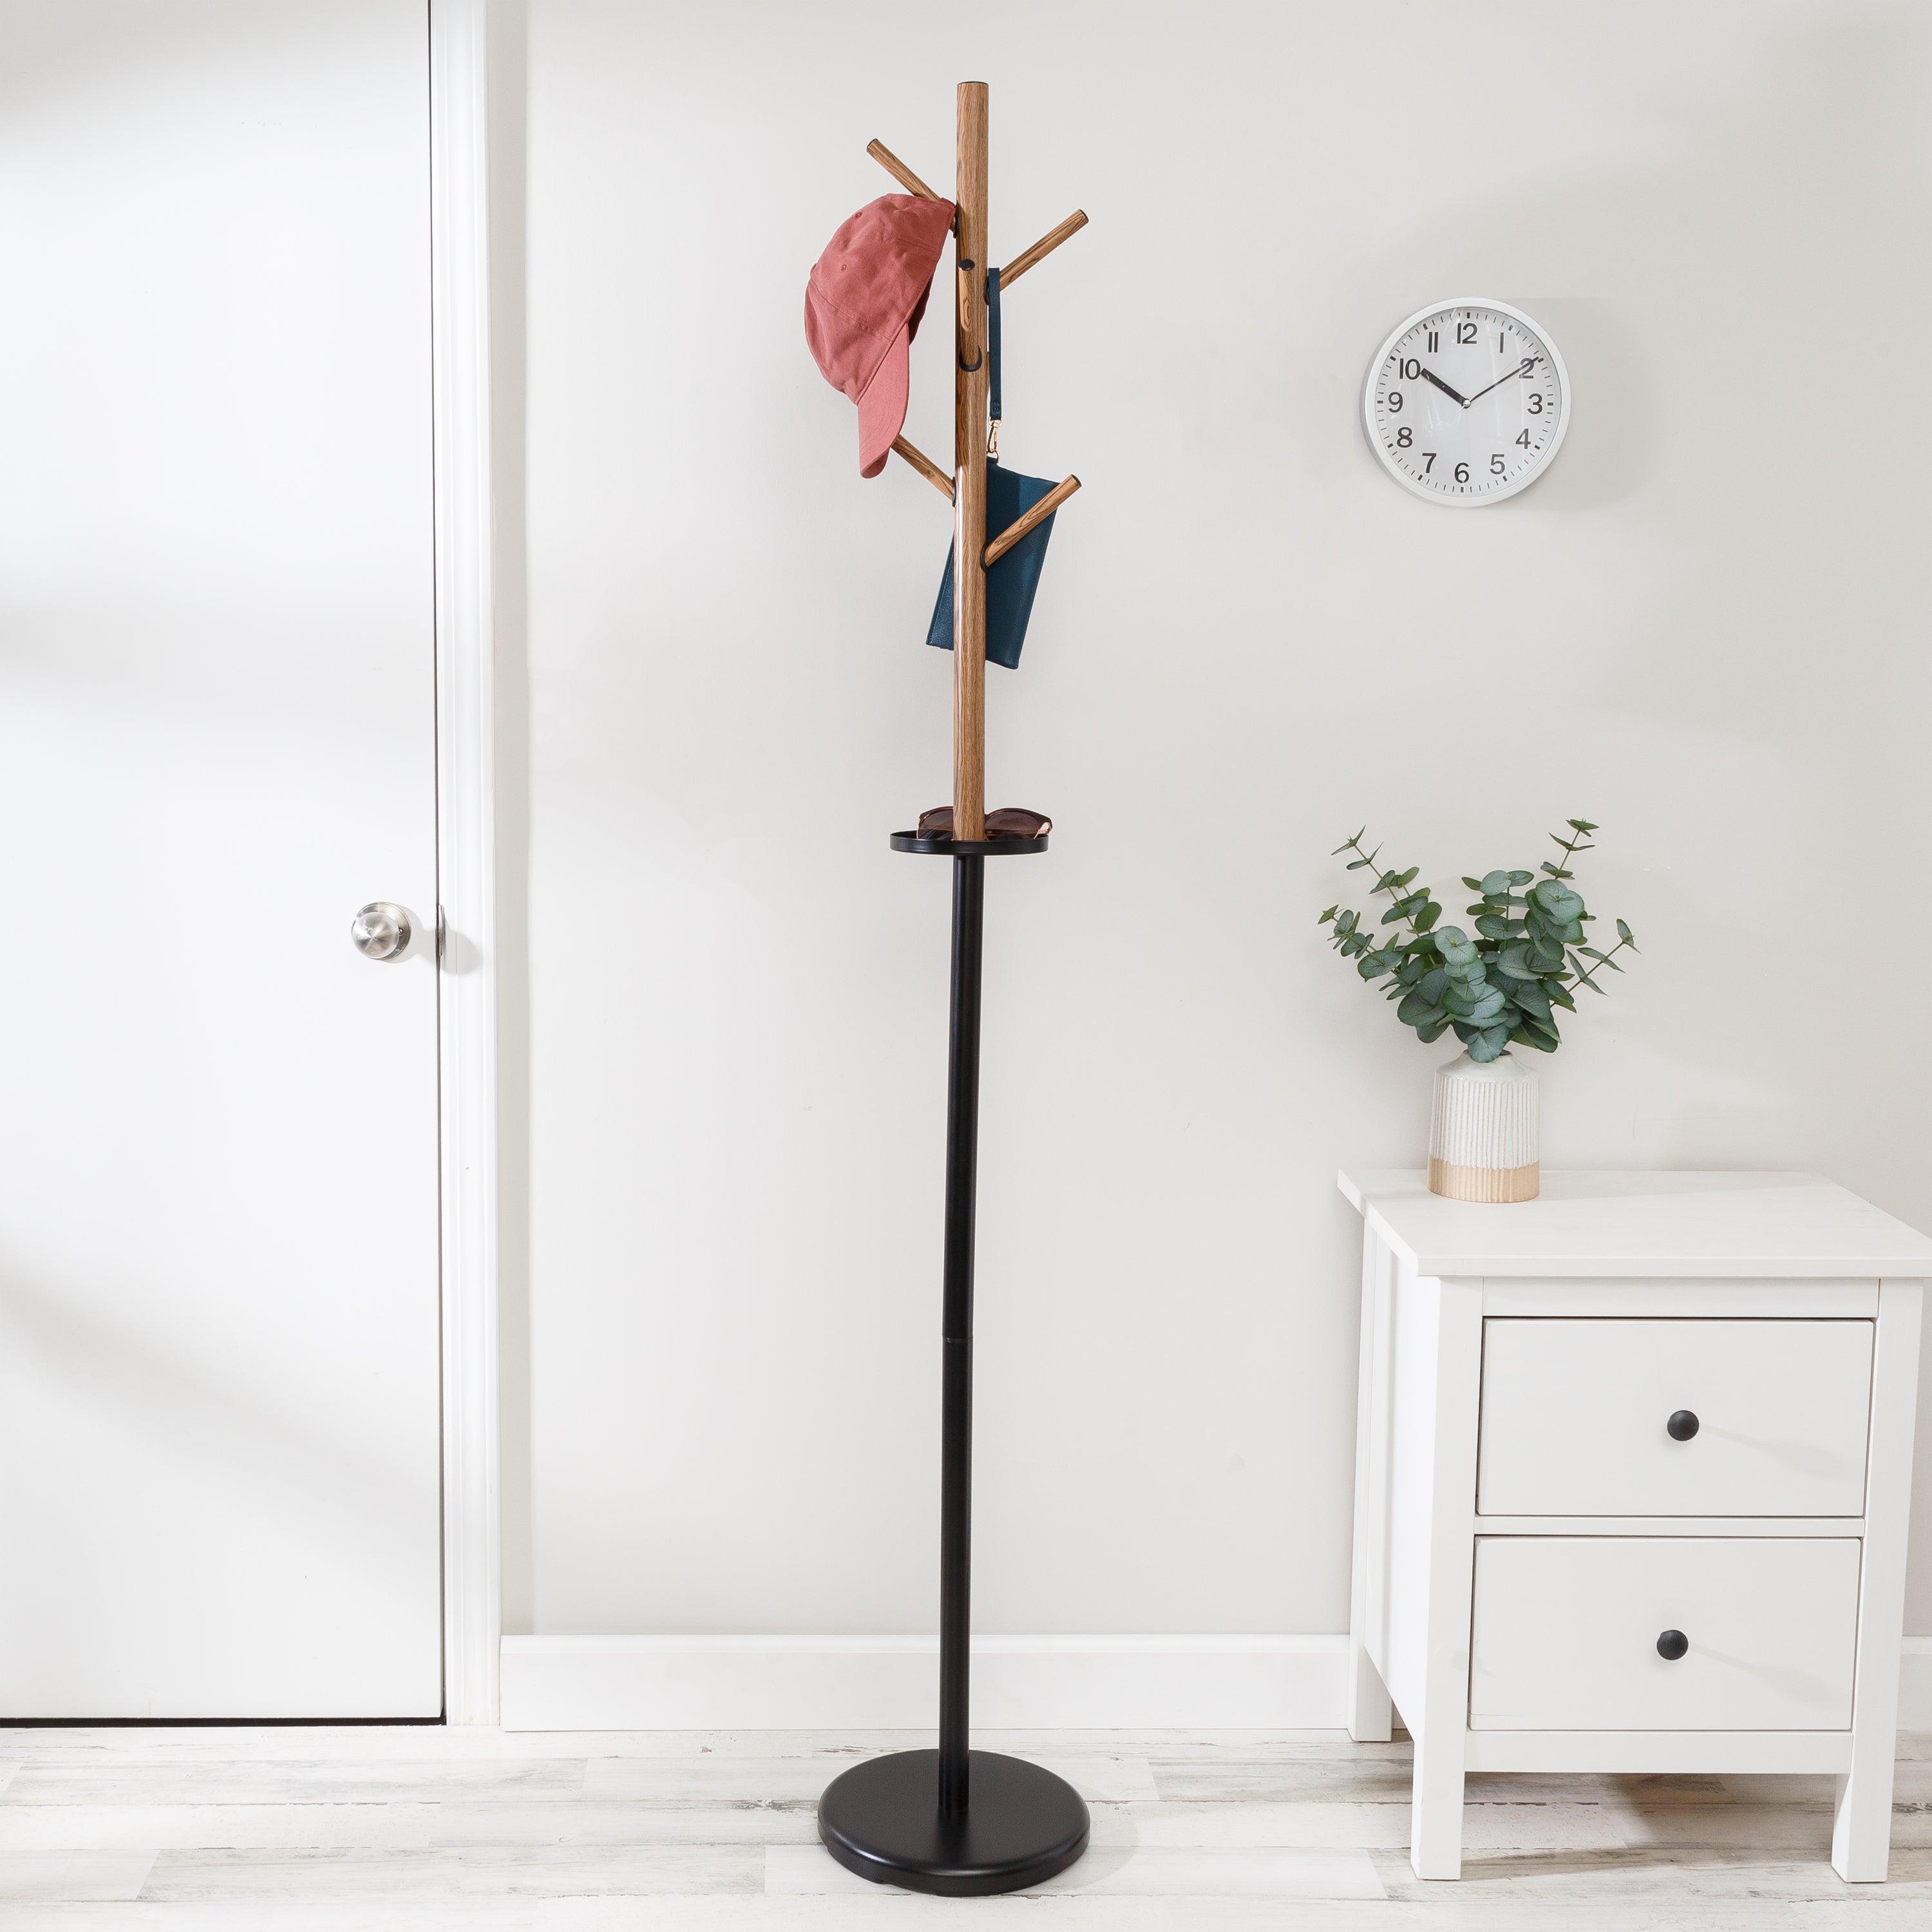 Honey-Can-Do Black/Brown Freestanding Coat Rack with Accessory Tray